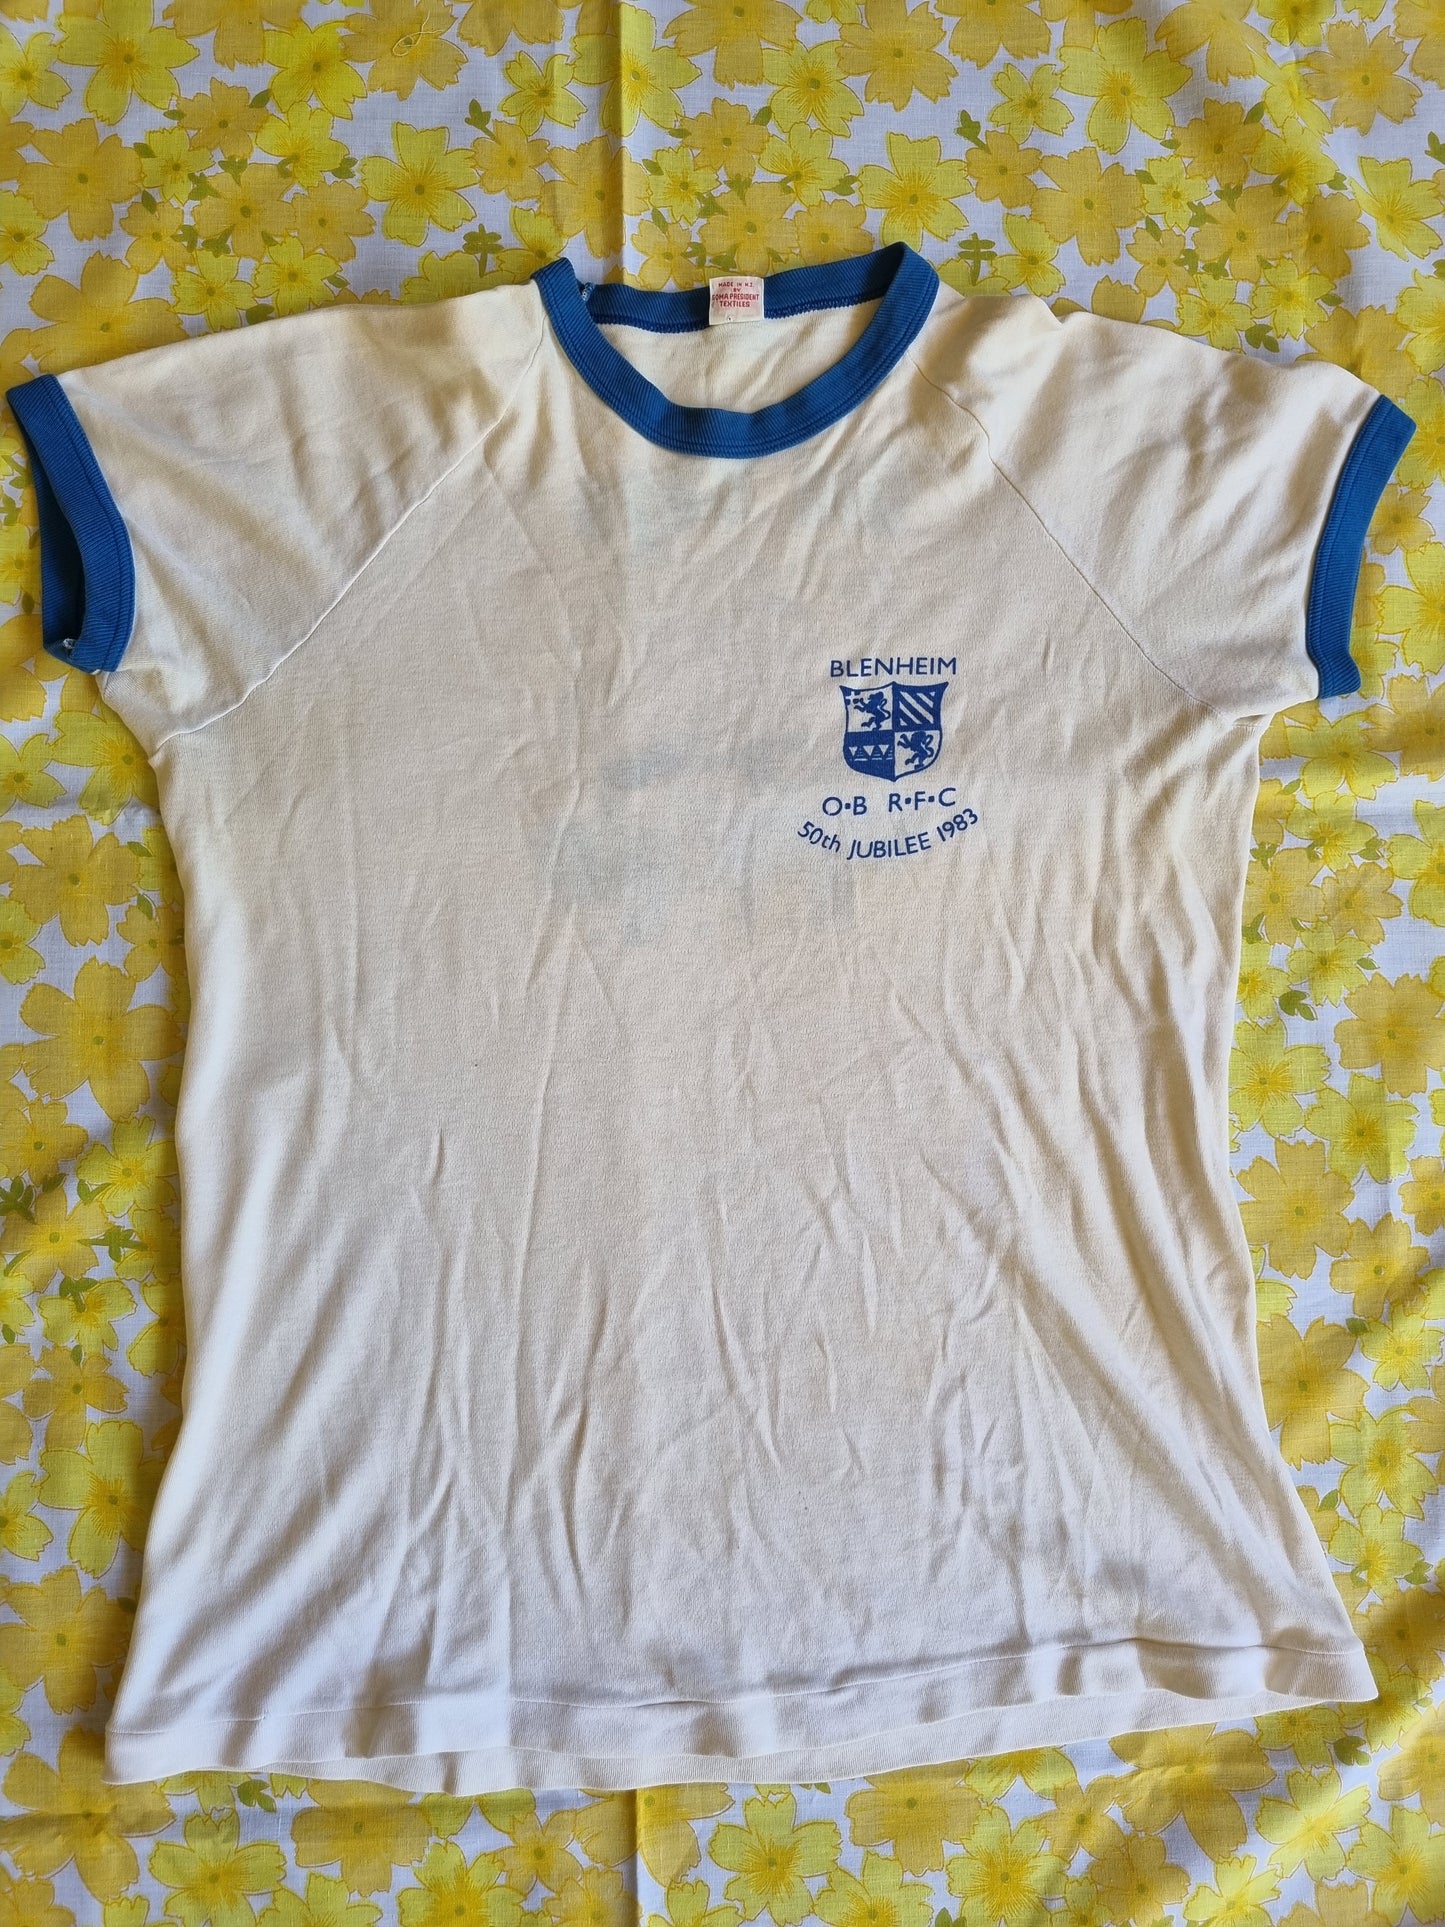 Vintage T-shirt 'Old Boys' (Men's Small)